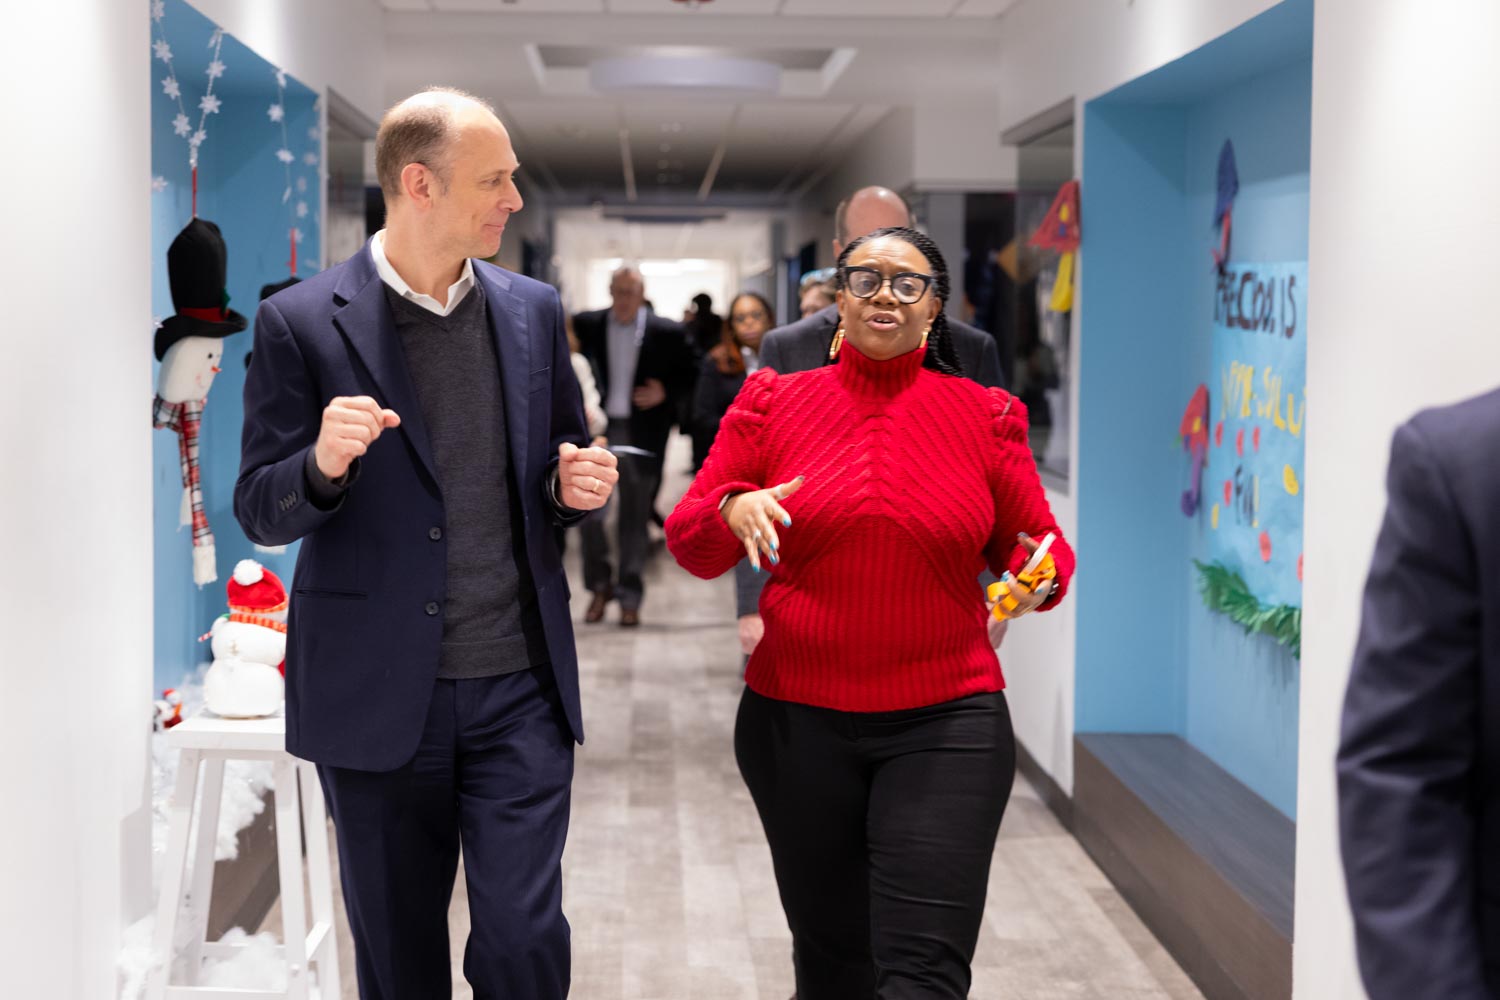 Austan Goolsbee, president and CEO of the Federal Reserve Bank of Chicago, walks down a hallway at Detroit's MiSide childcare center talking with Rhonda Mallory Burns, the center's Early Head Start/Head Start director. 